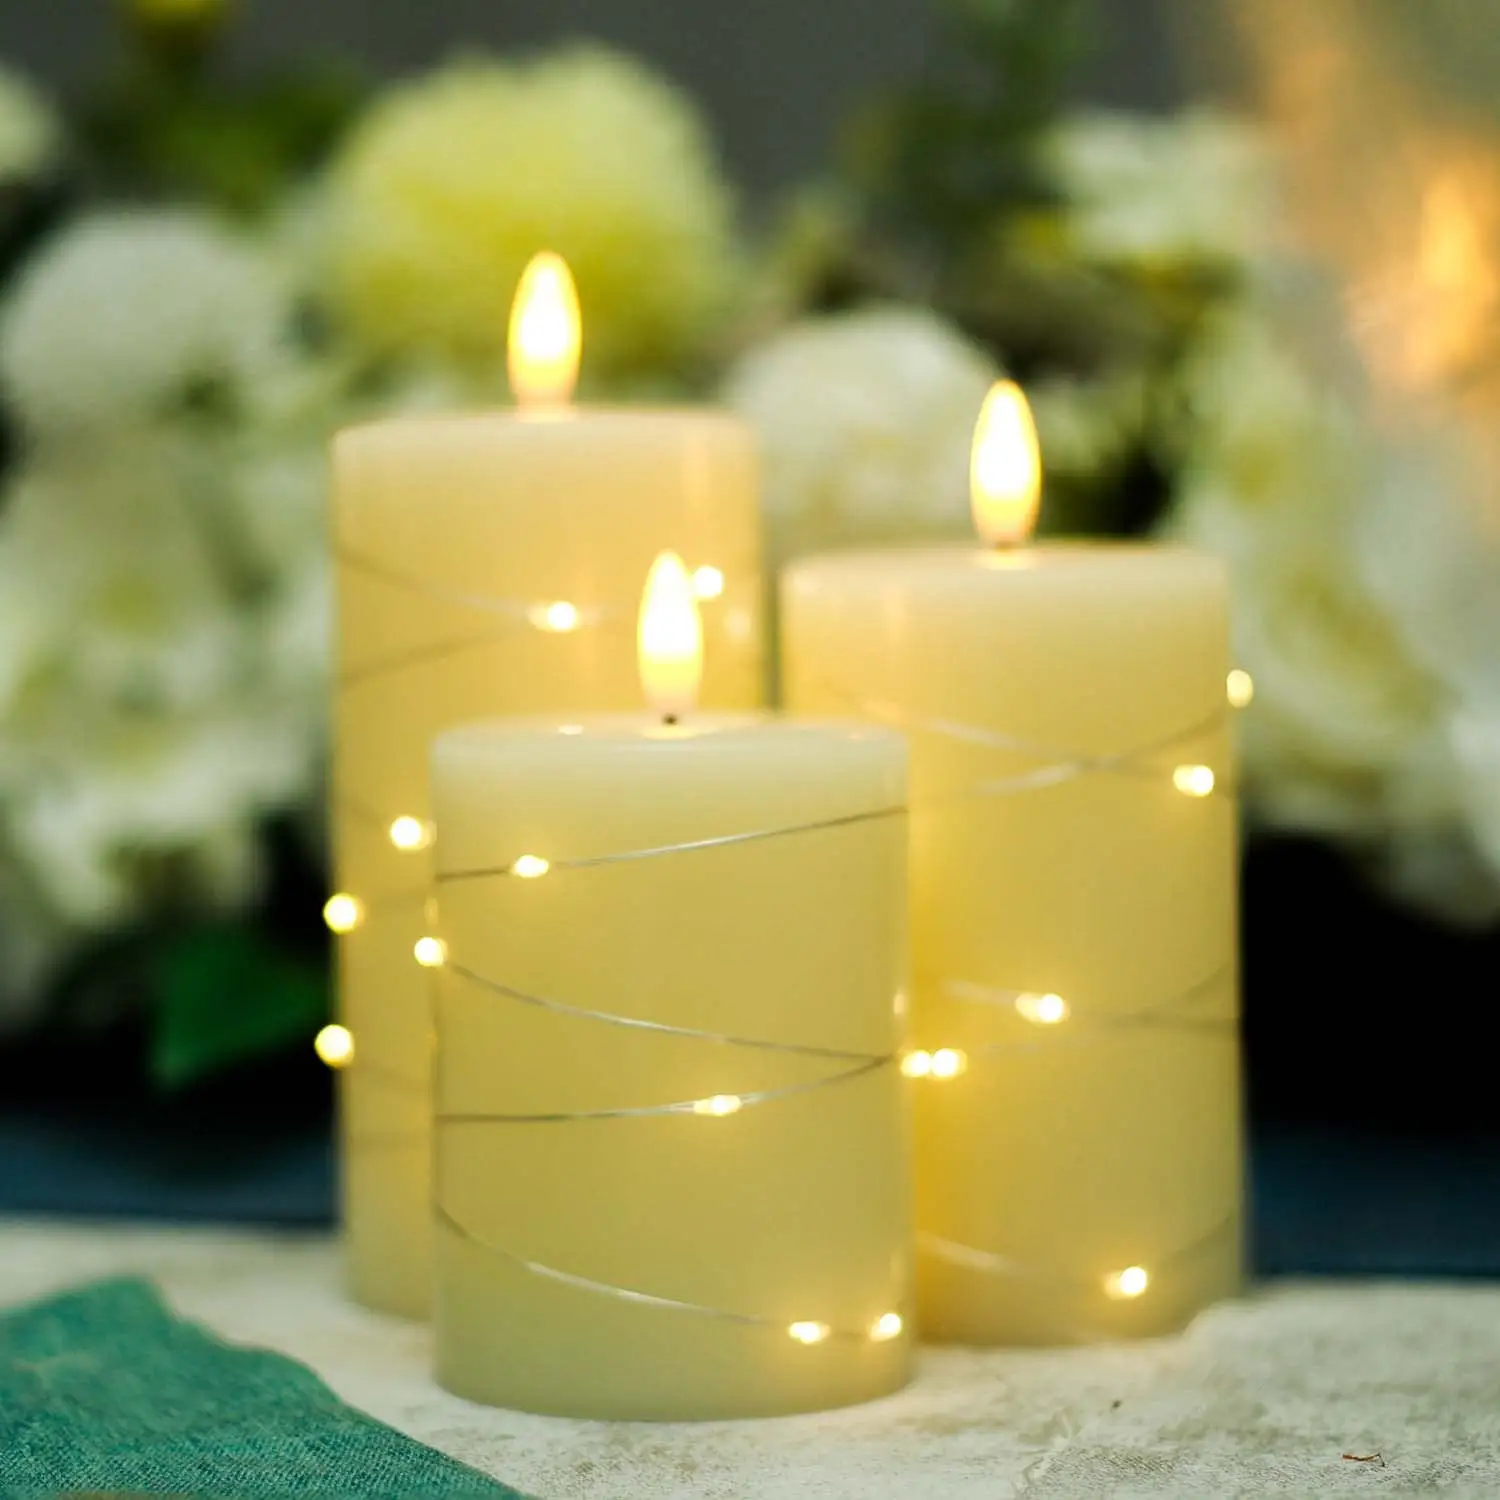 3 PCS Remote Control Decorative String Lights Led Pillar Candles with Timer